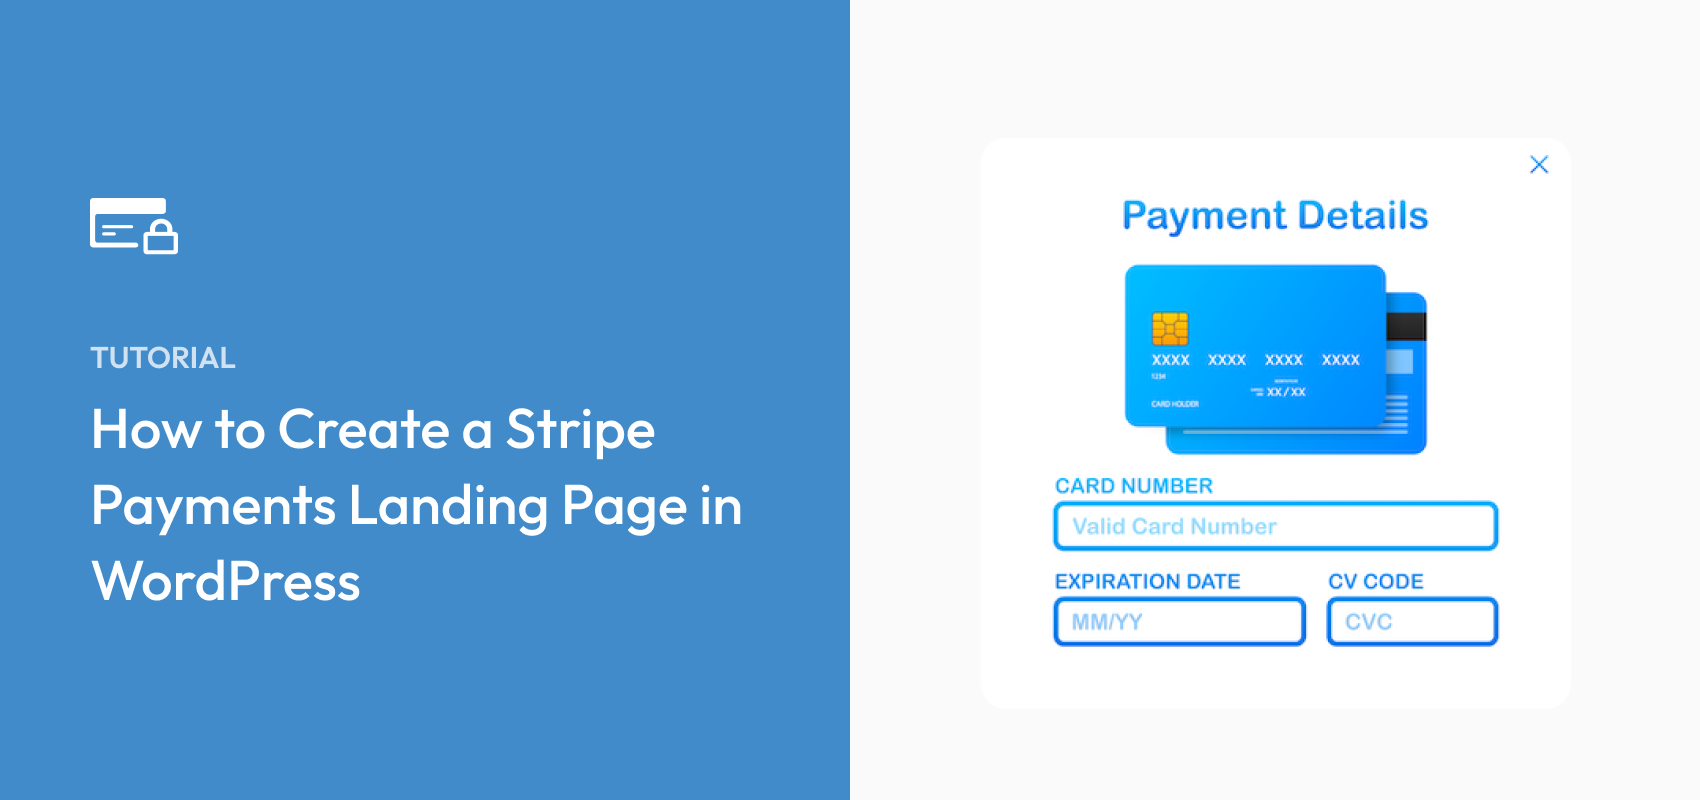 How to Create a Stripe Payments Landing Page in WordPress